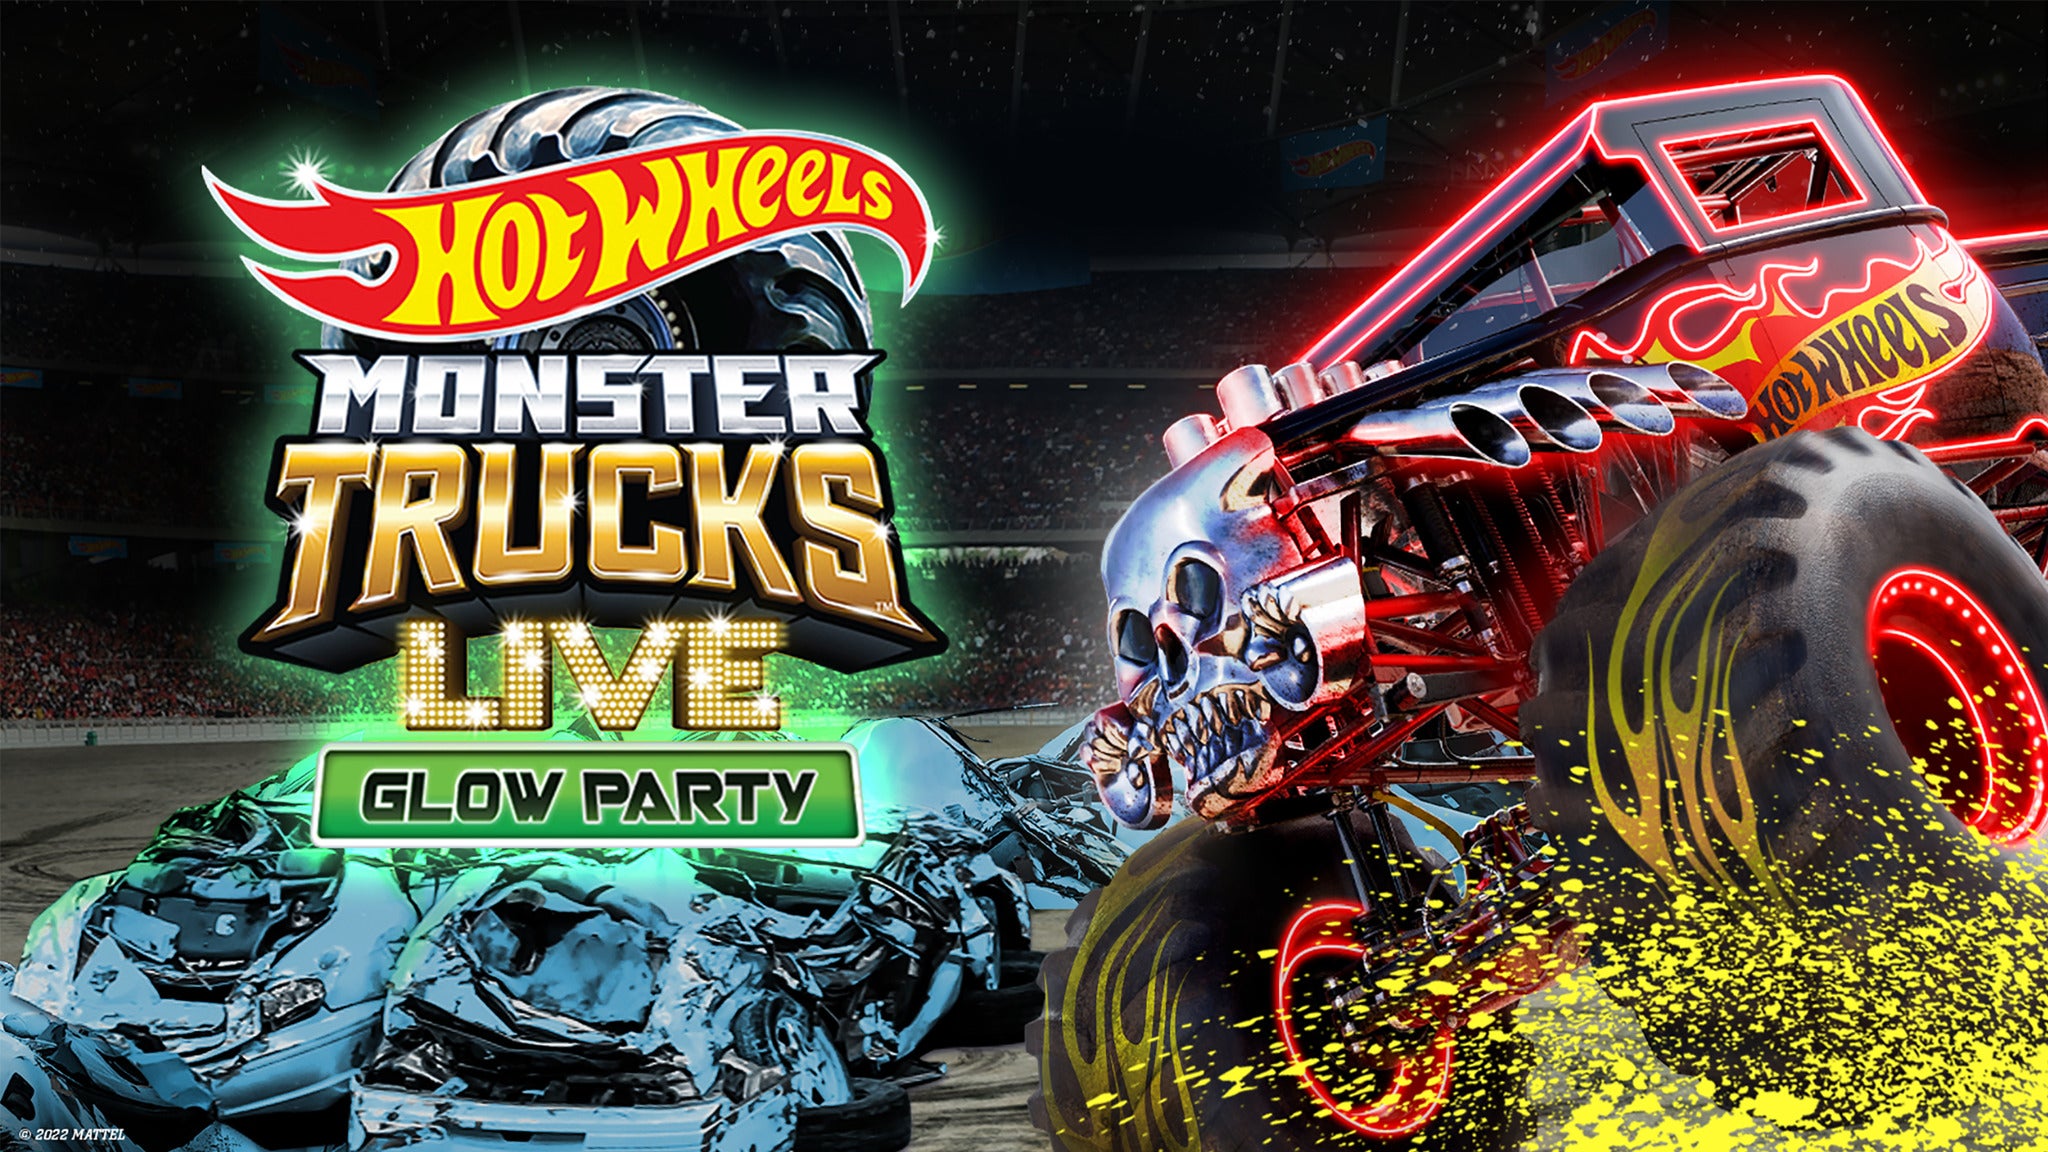 Hot Wheels Monster Trucks Live Glow Party at Family Arena